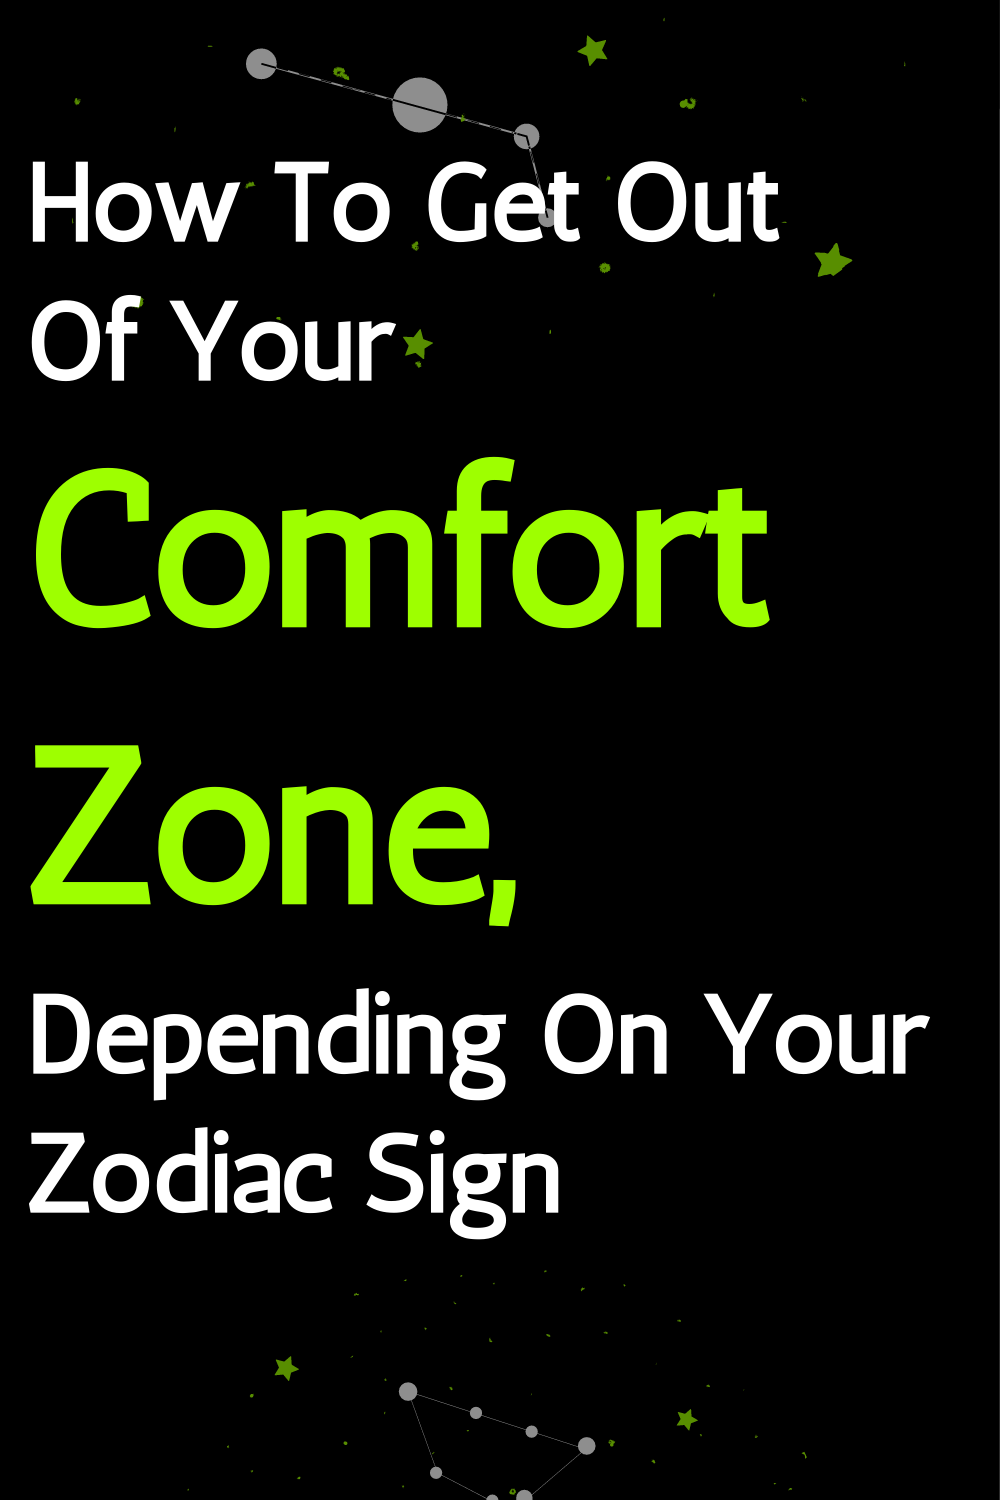 How To Get Out Of Your Comfort Zone, Depending On Your Zodiac Sign